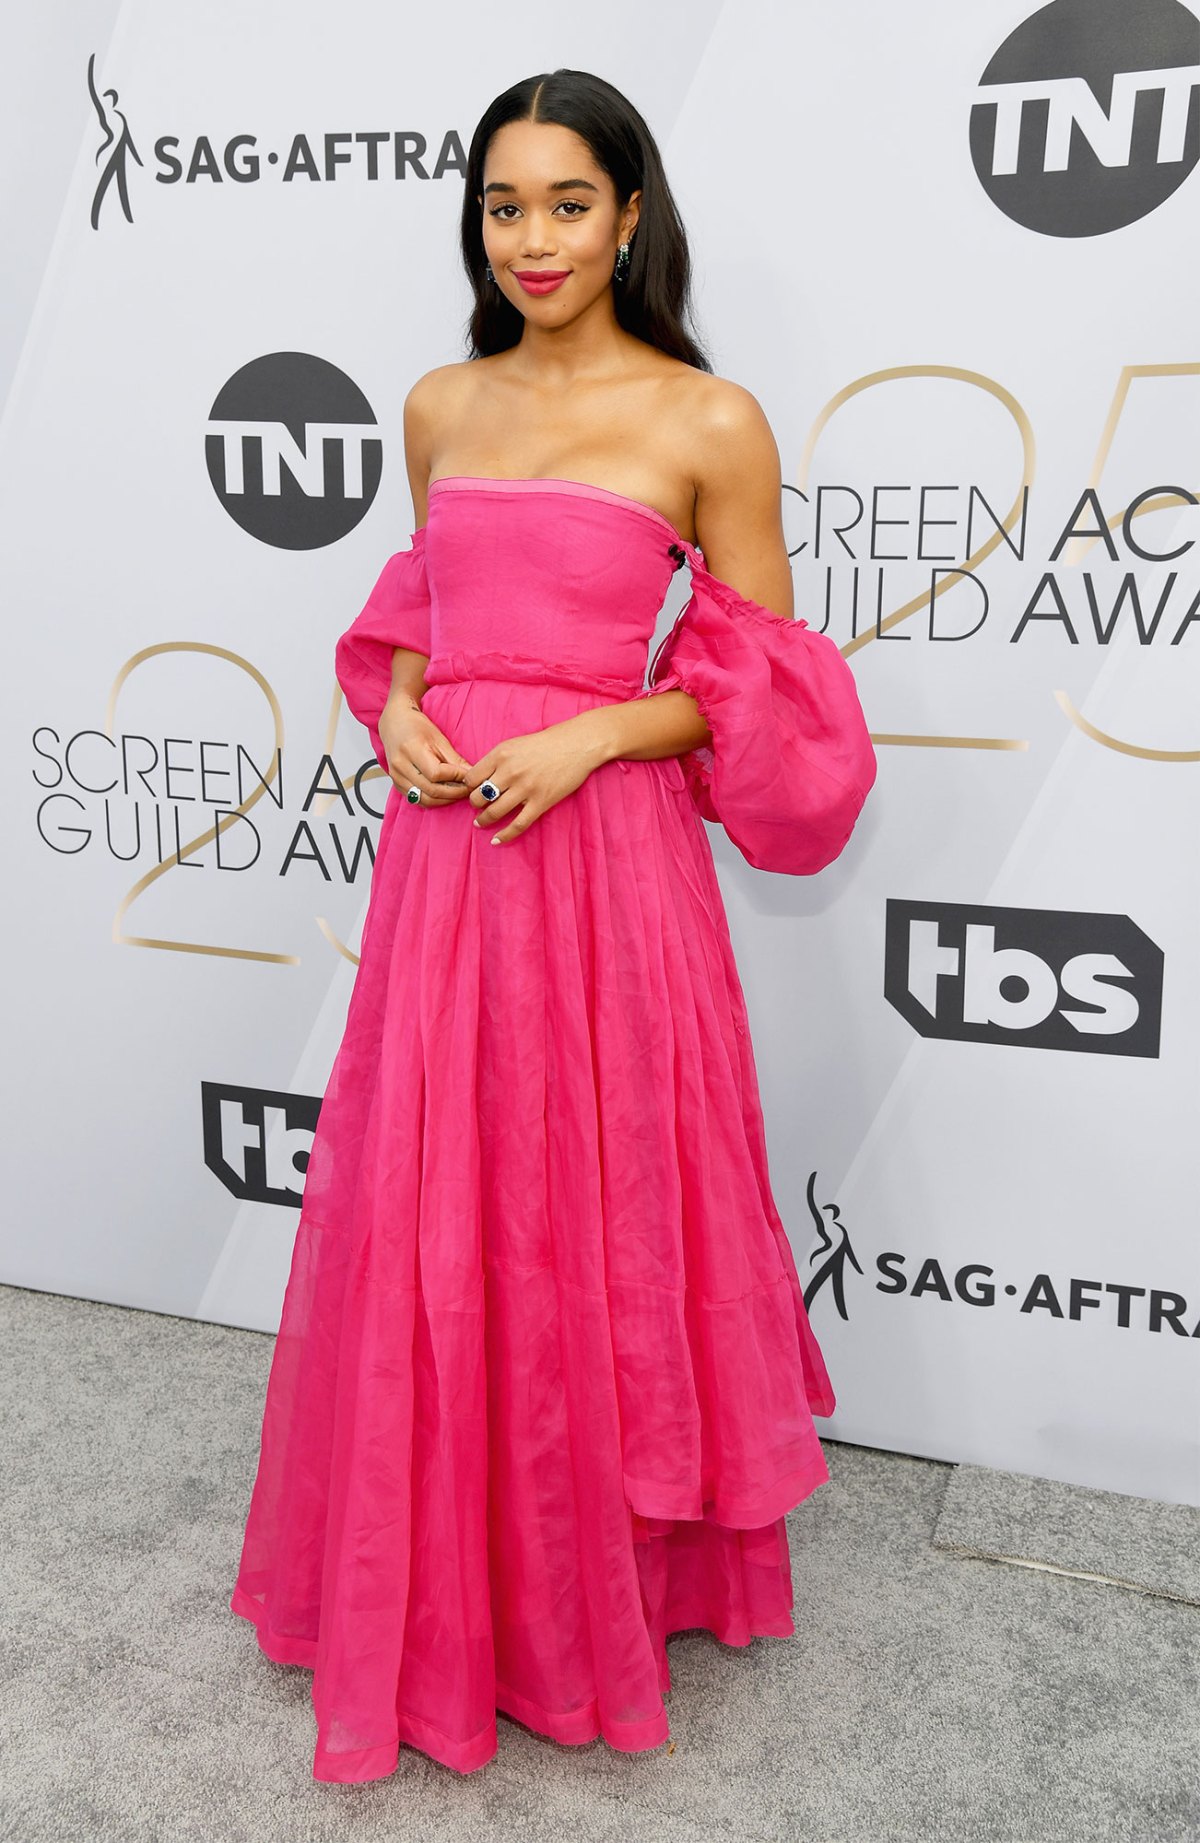 https://www.usmagazine.com/stylish/pictures/sag-awards-2019-red-carpet-fashion-see-celeb-dresses-gowns/lucy-boynton-6/